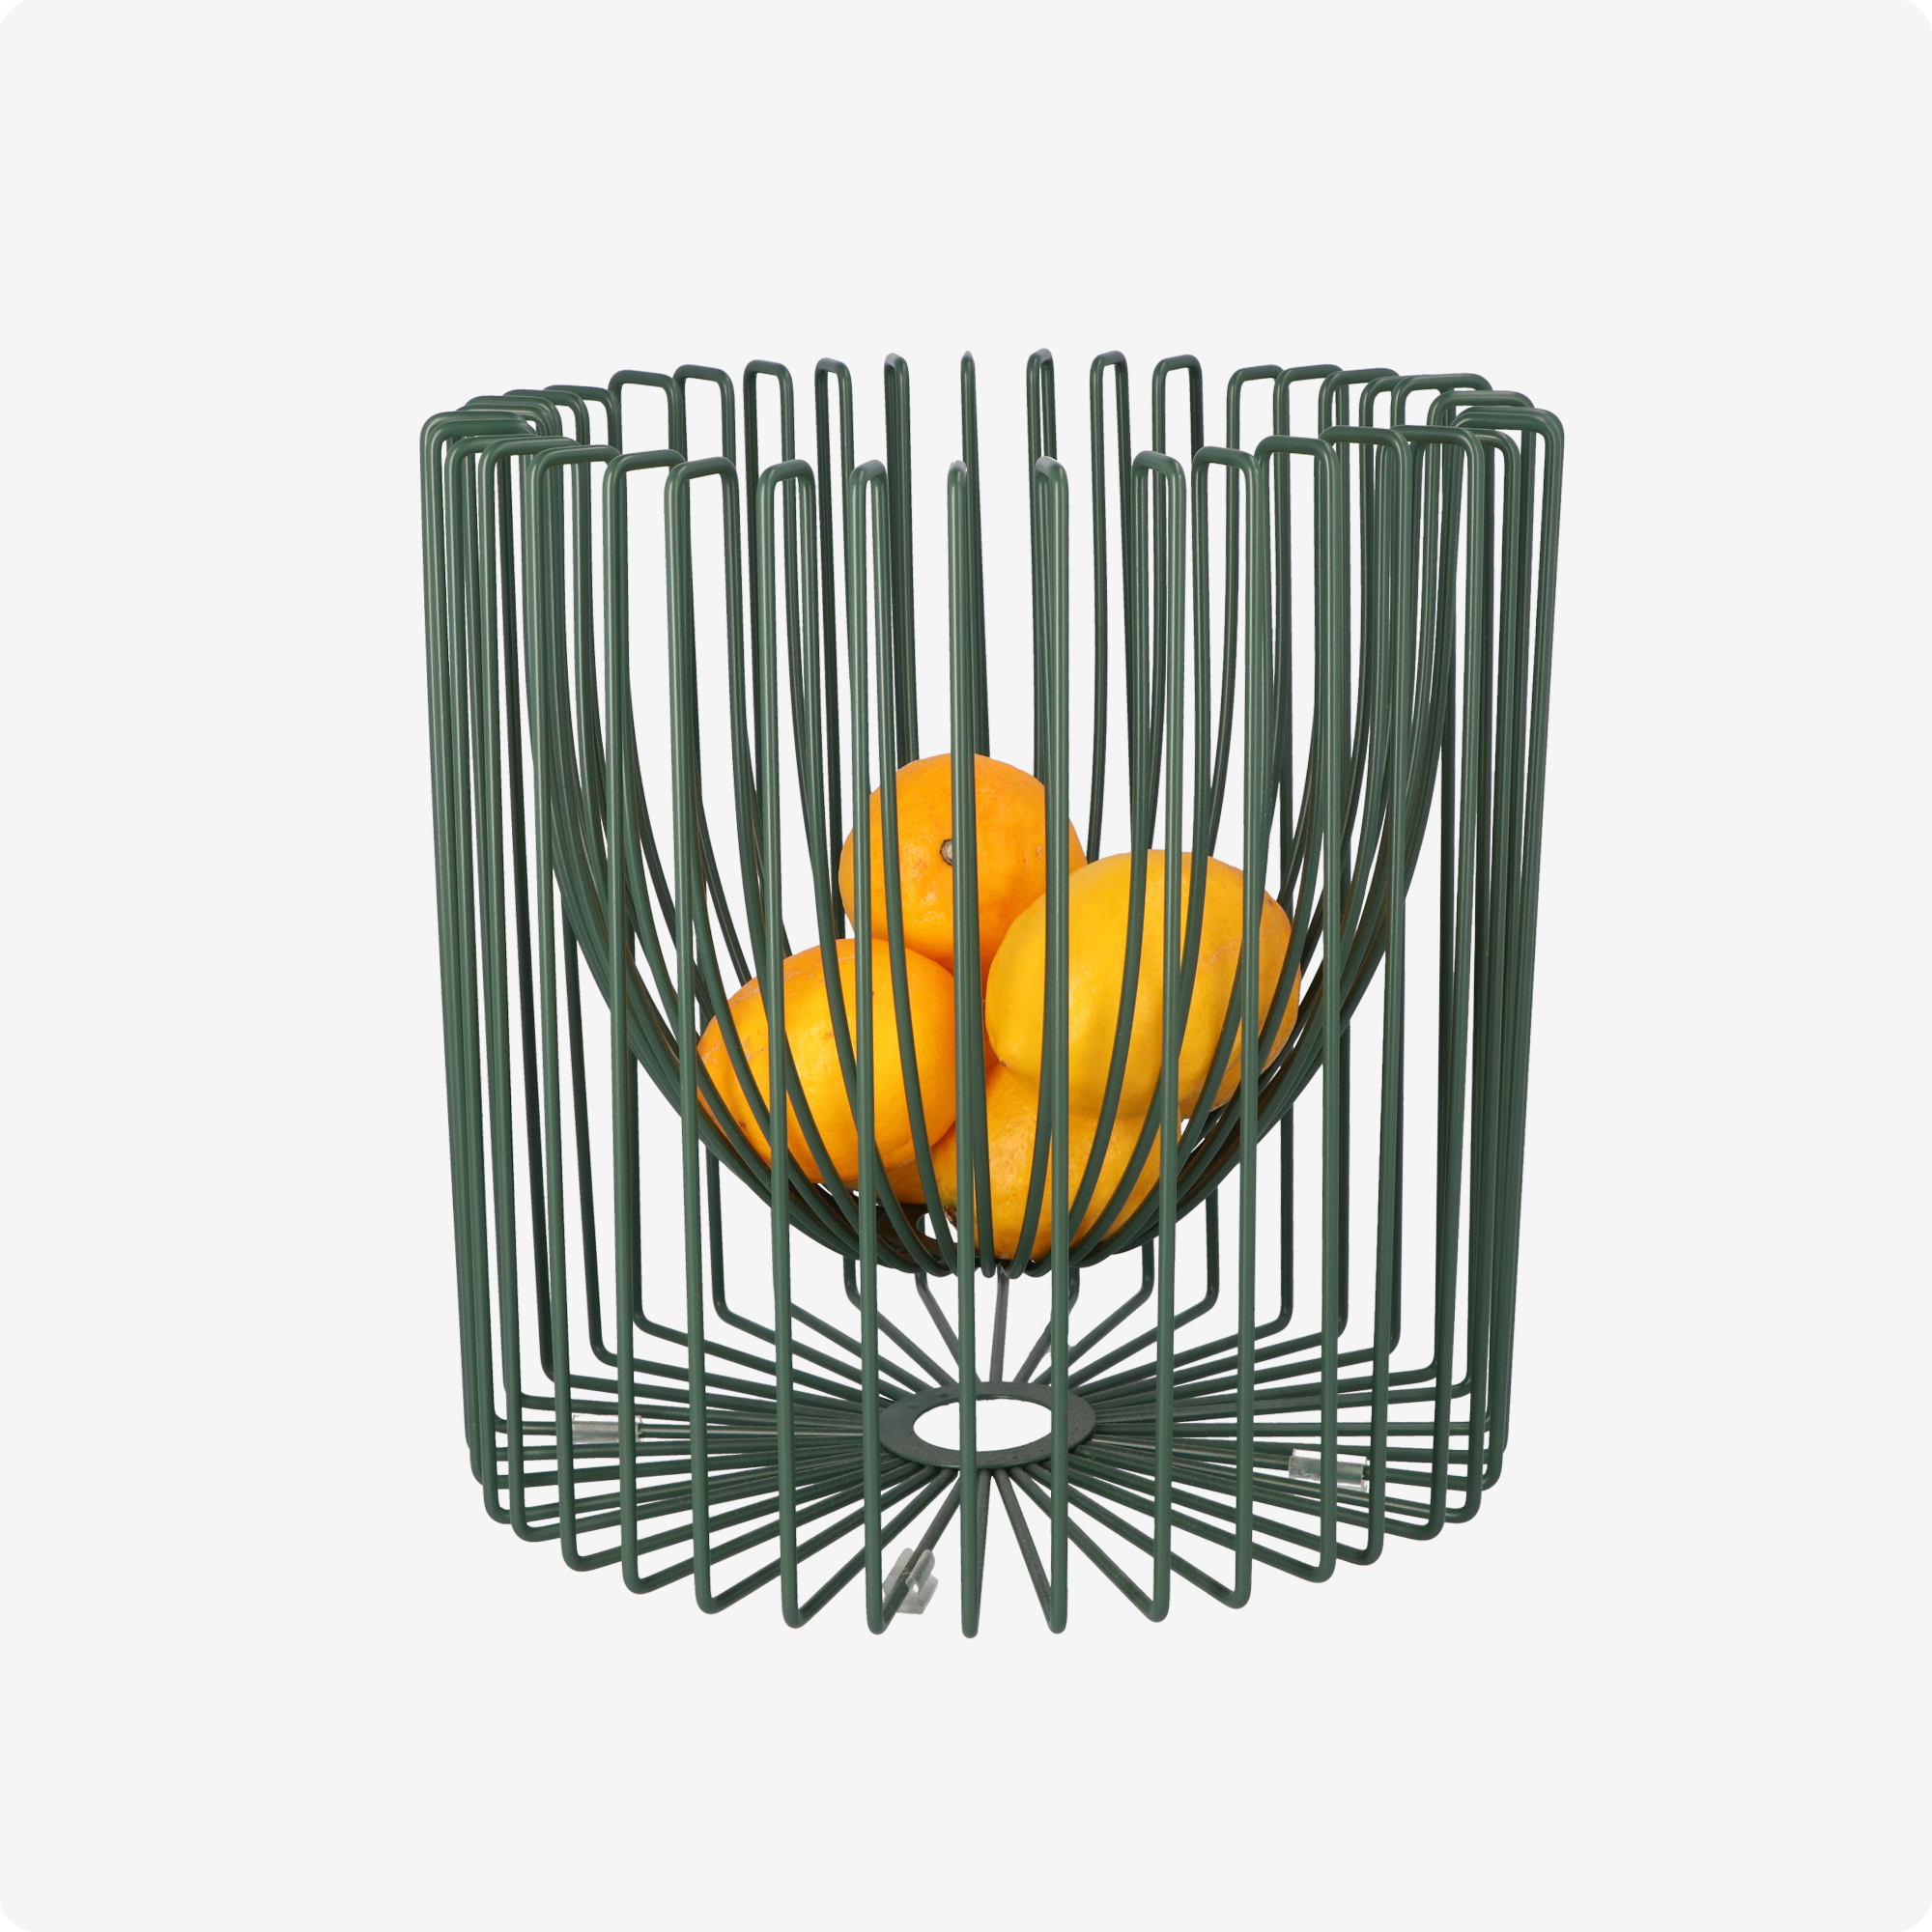 Green Wire basket with lemons product shot example